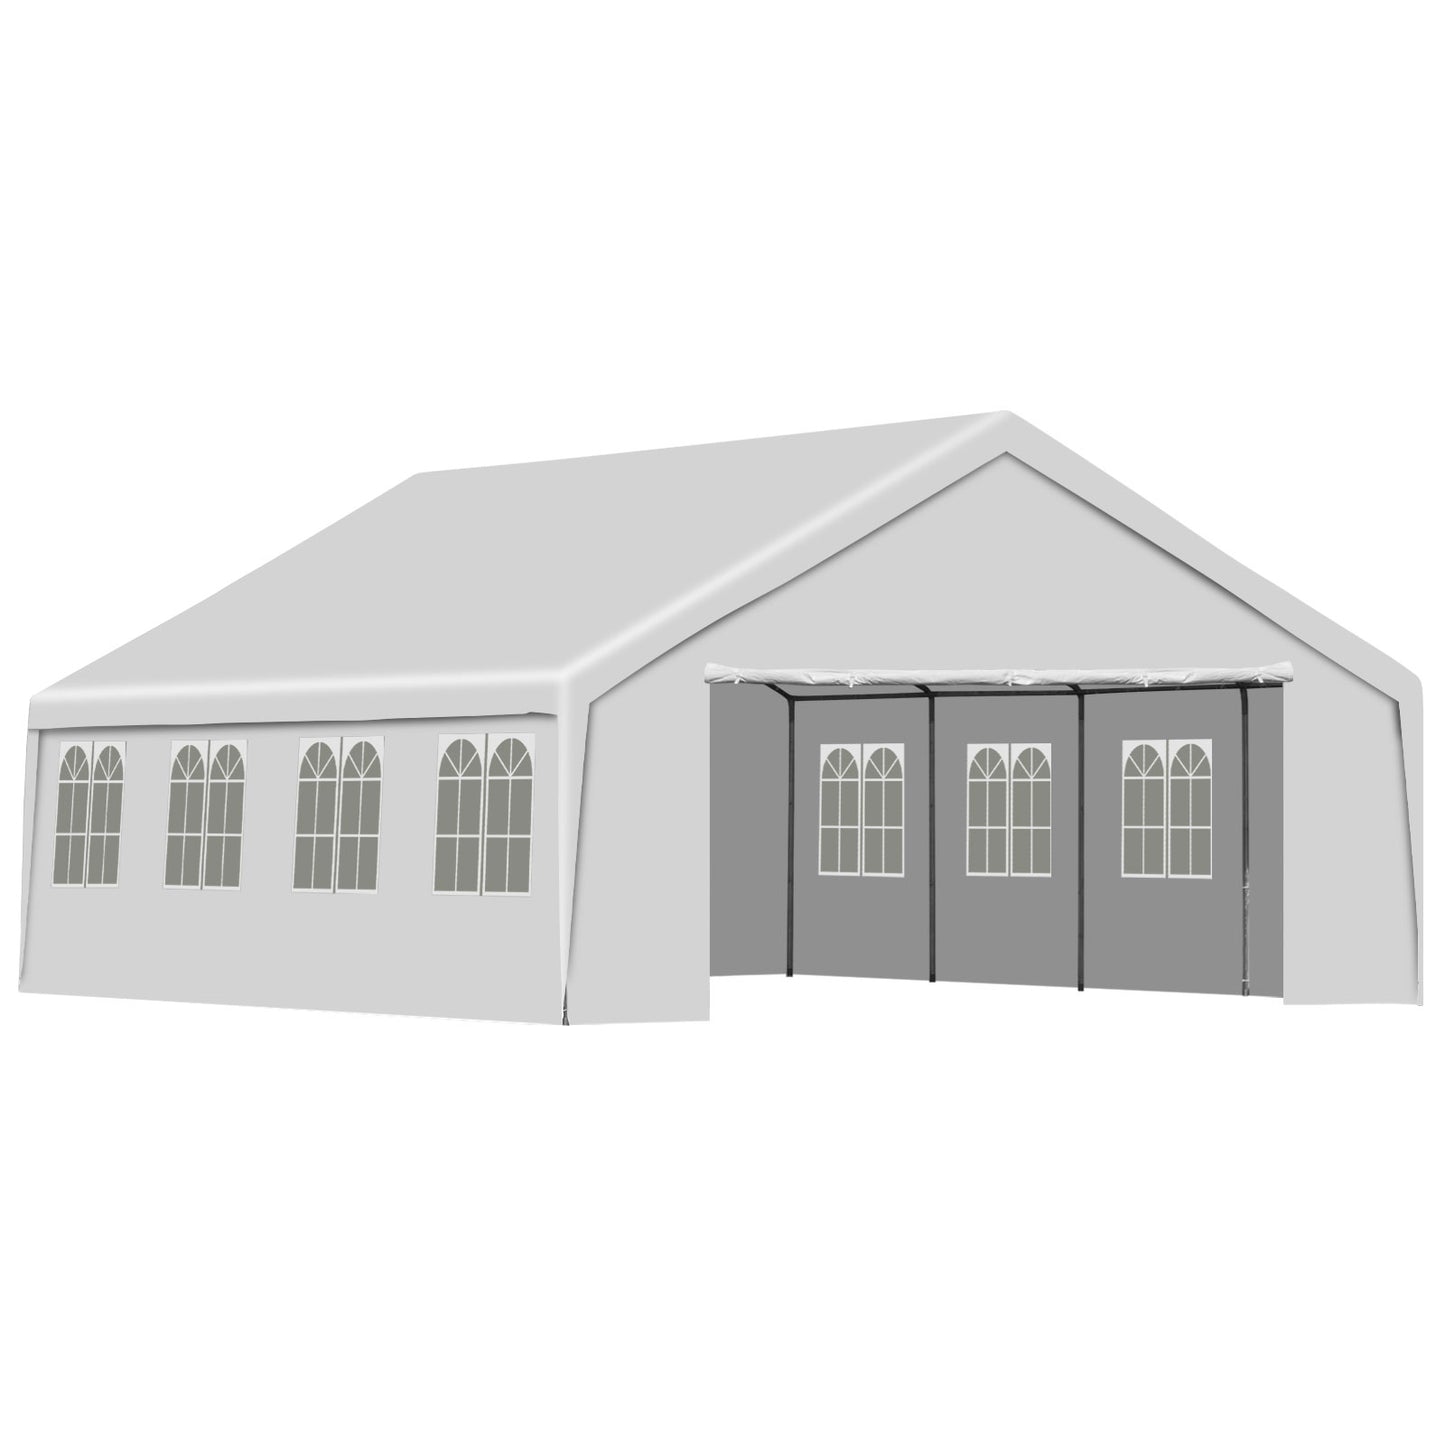 20 x 20 FT. /26 x 20 FT. Marquee Party Tent with Church Window Sidewalls - White  Aoodor    